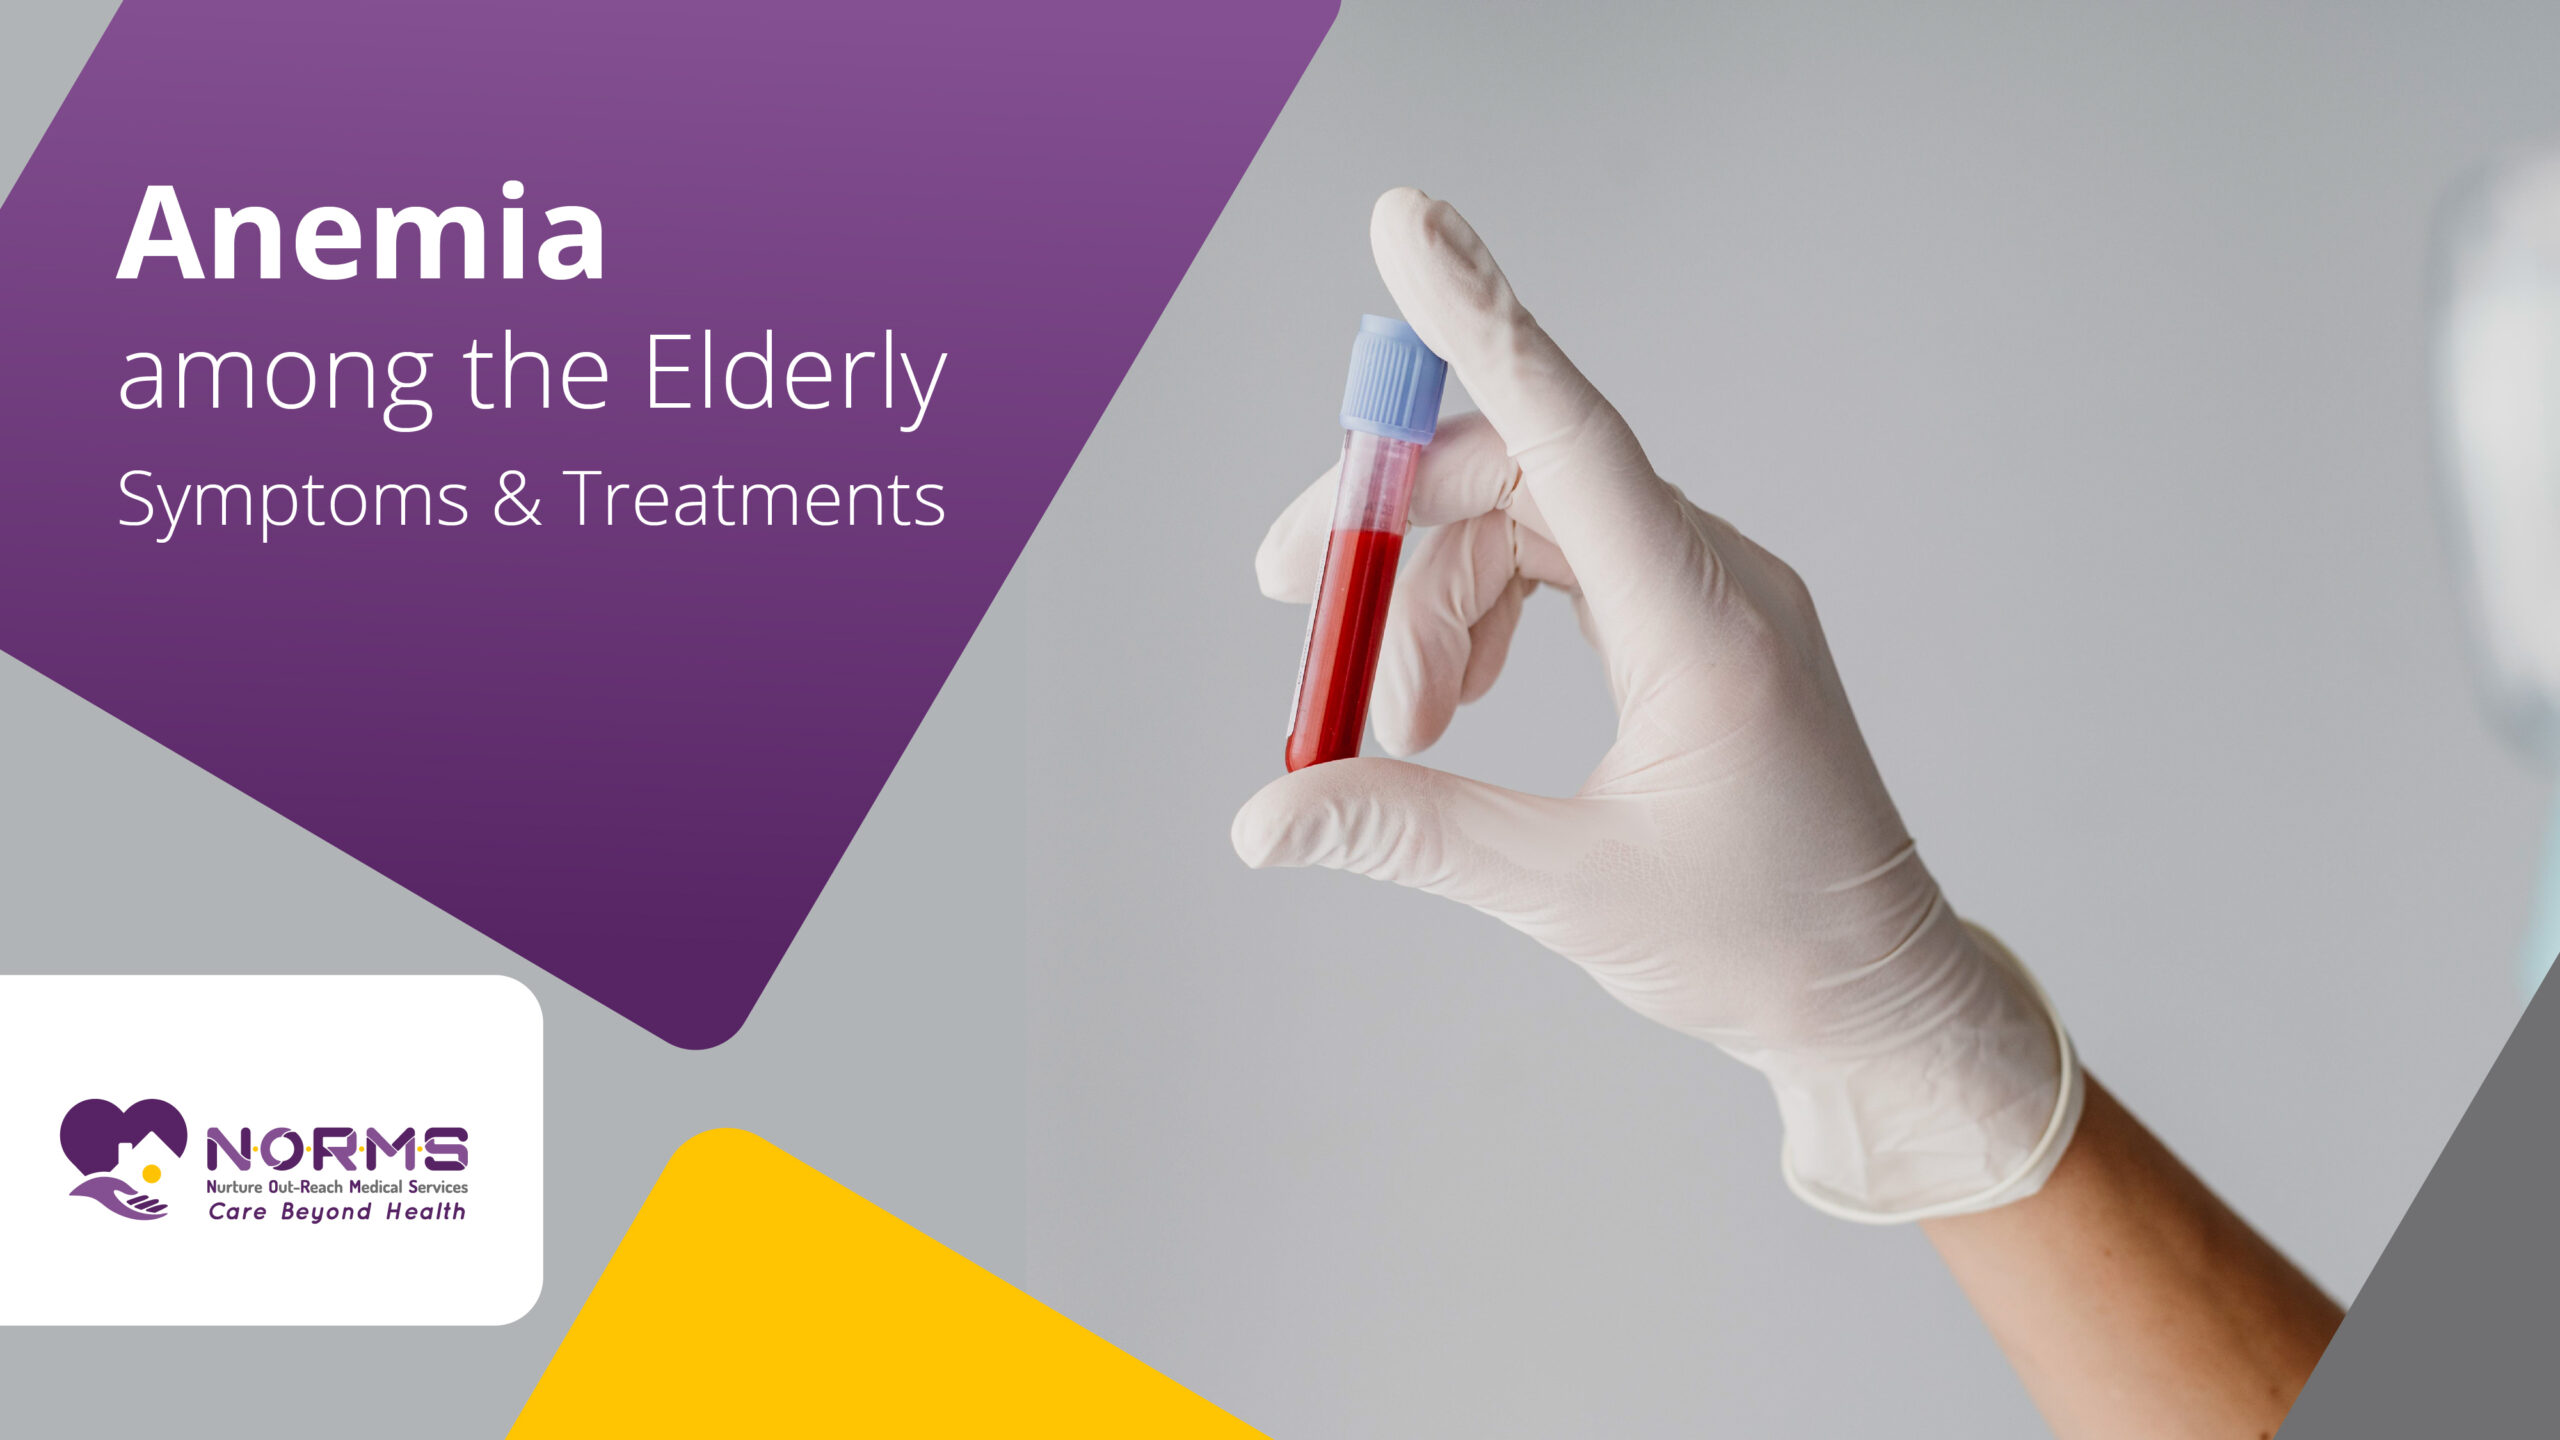 Anemia among the Elderly: Symptoms and Treatments